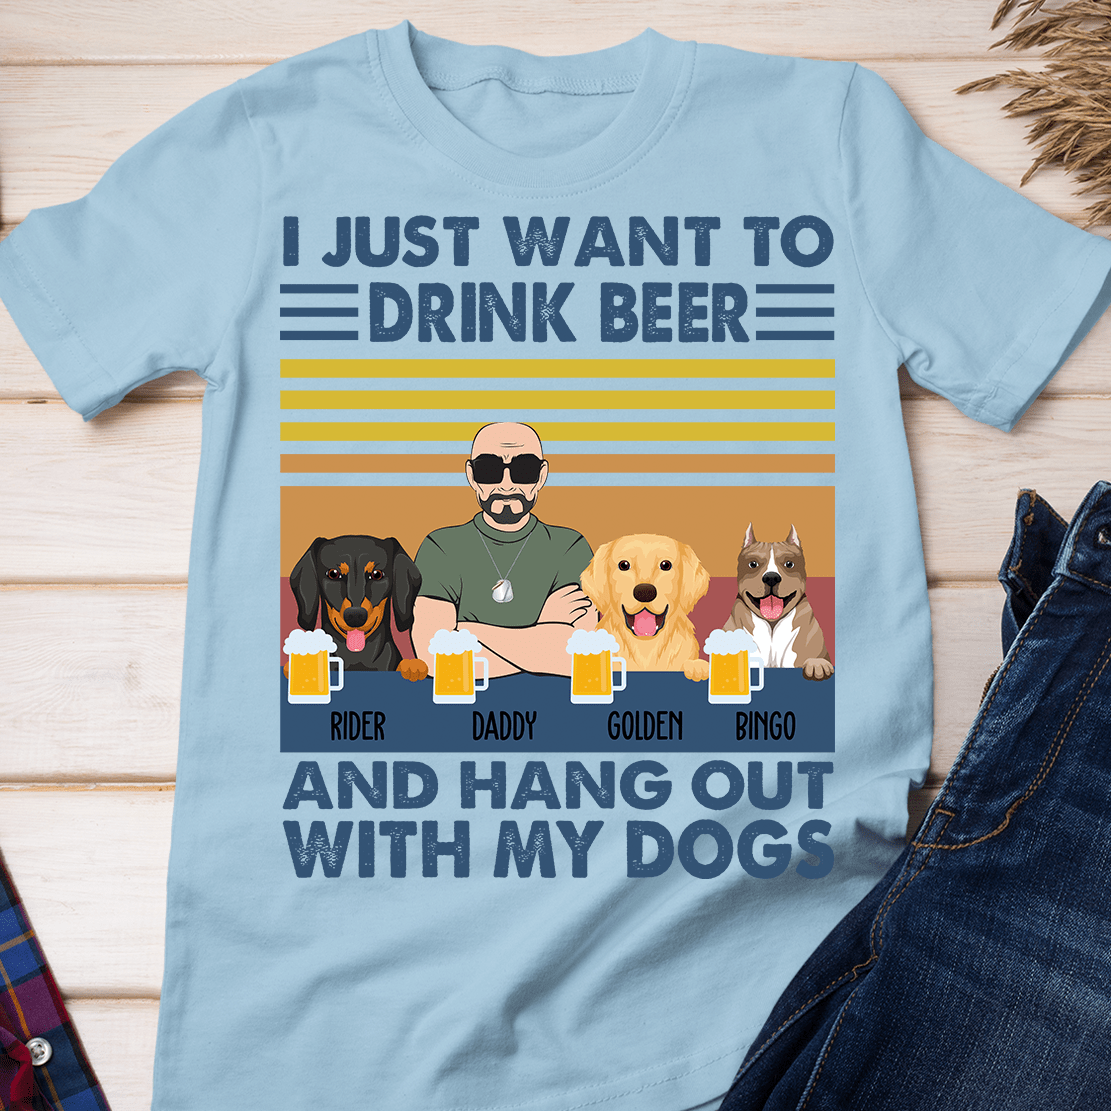 GeckoCustom Personalized Custom Dog Shirt, I Just Want To Drink Beer With My Dogs, Dog Dad Gift Unisex T Shirt / Sport Grey / S